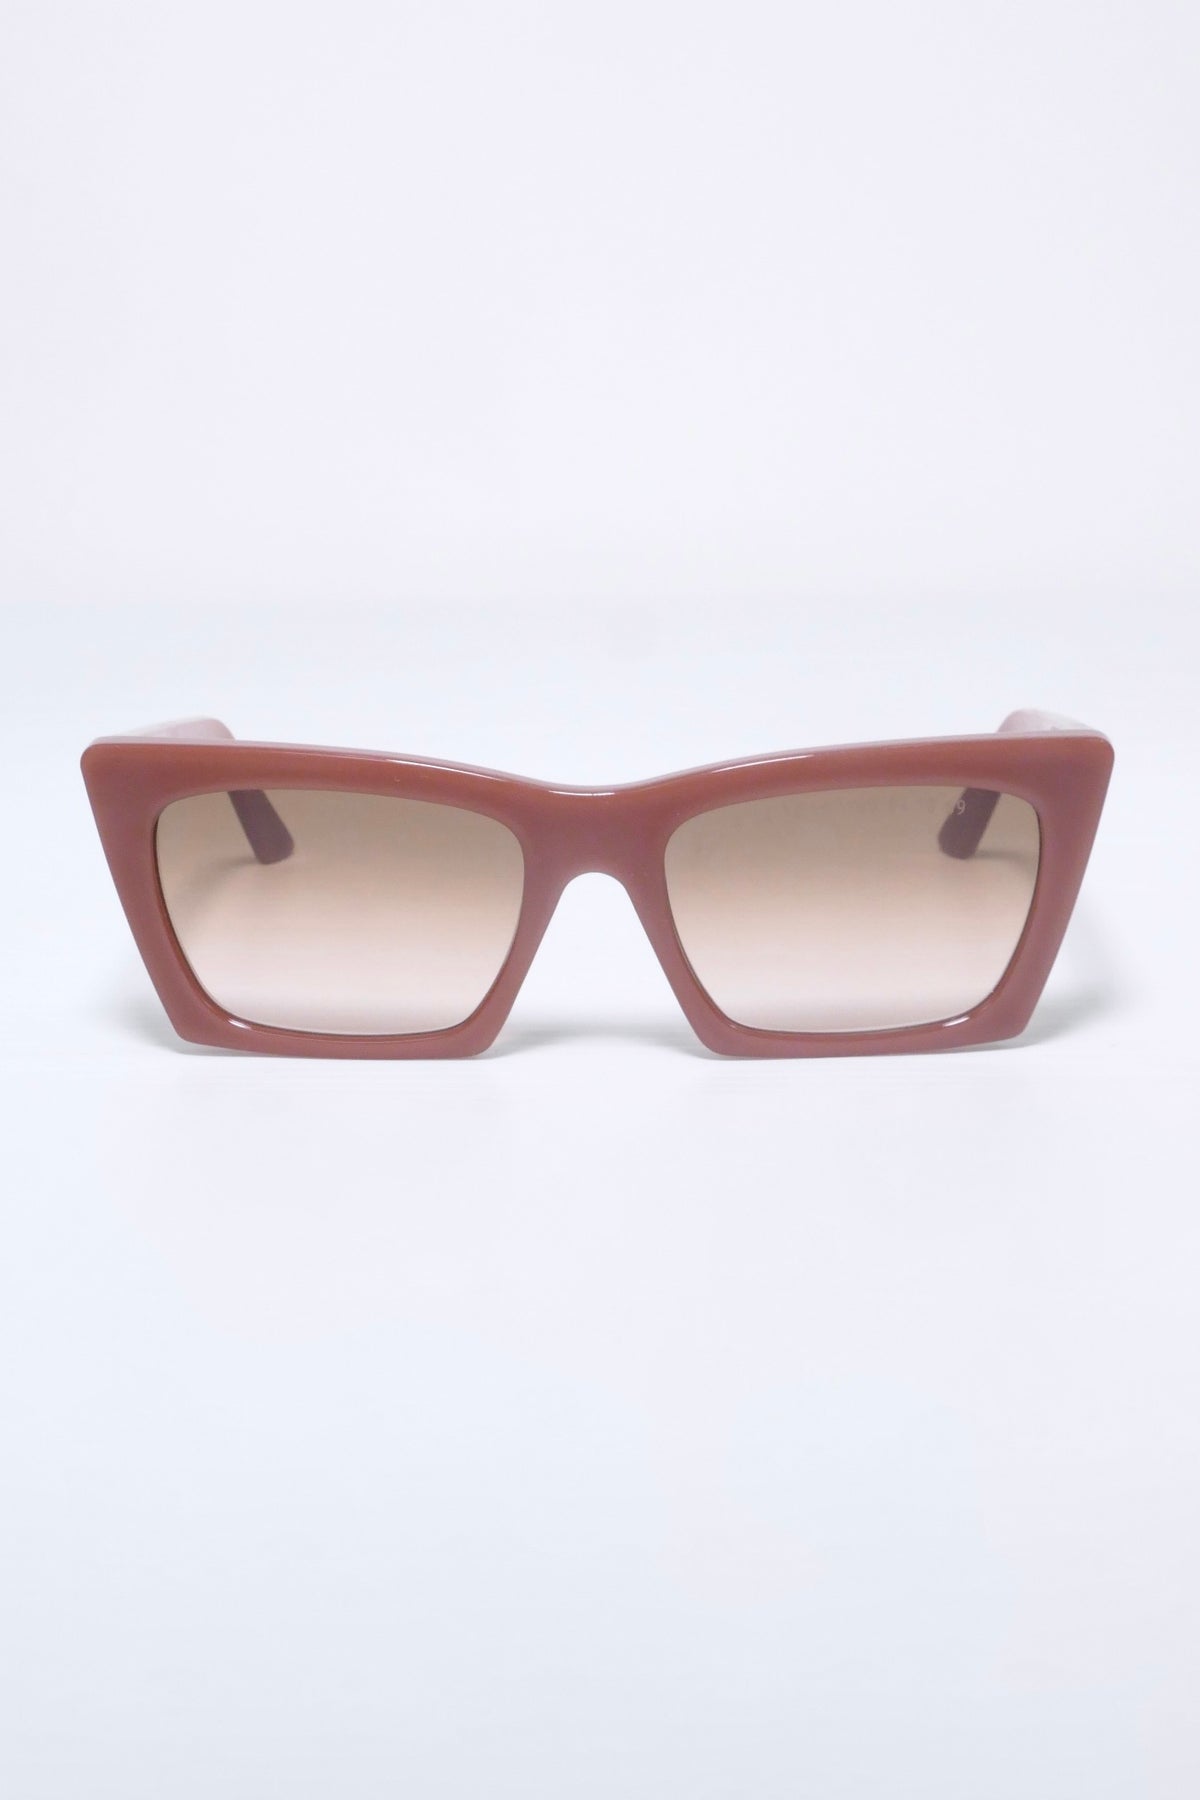 Clean Waves Type 04 Sunglasses - Red/Brown